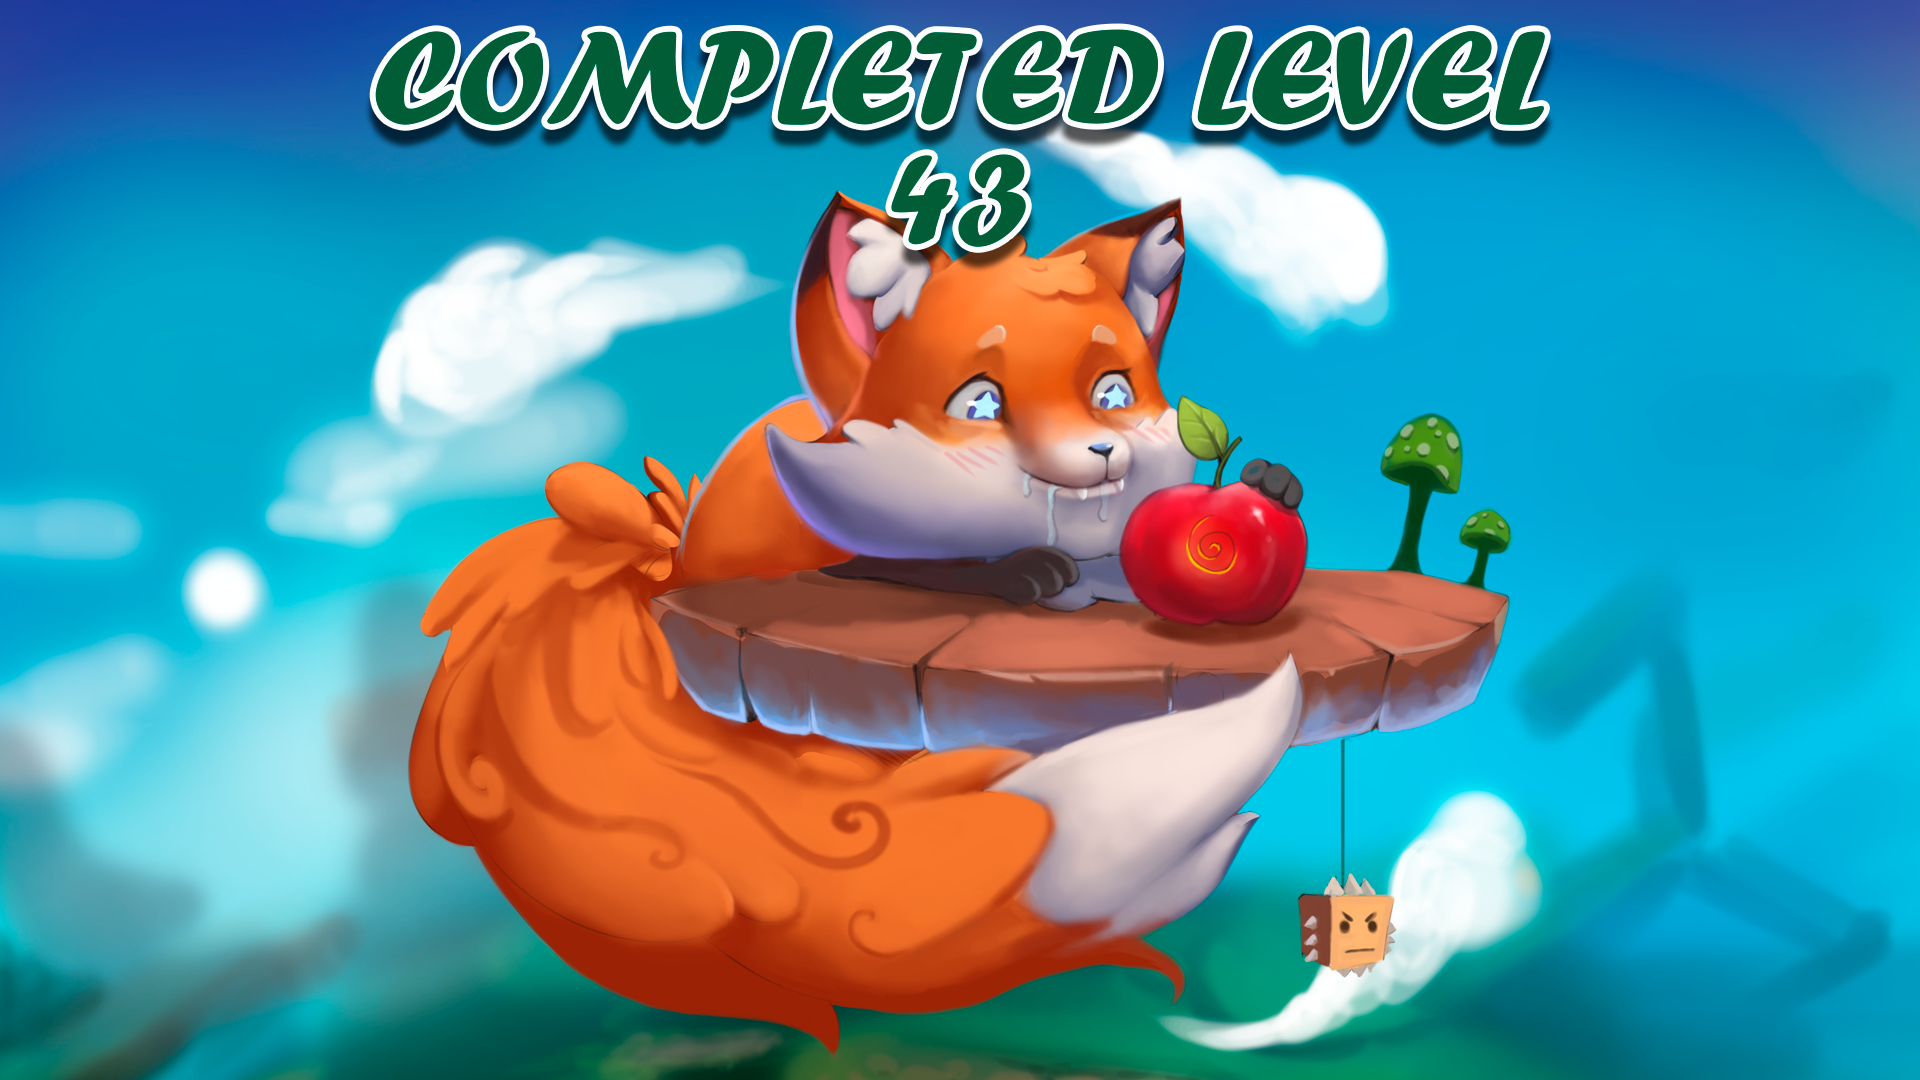 Icon for 43 levels completed